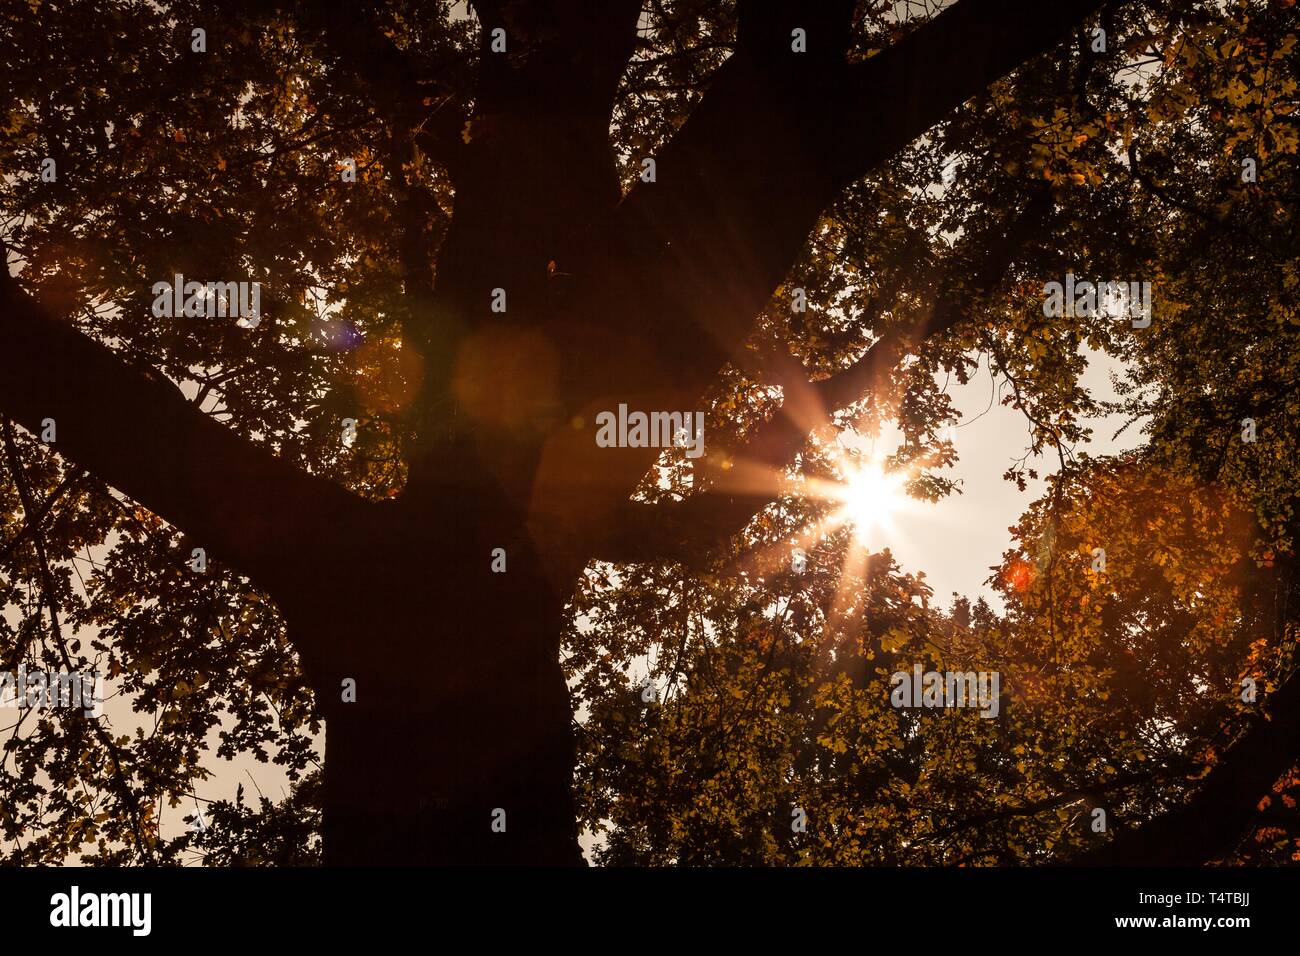 Tree with backlit, autumn Stock Photo